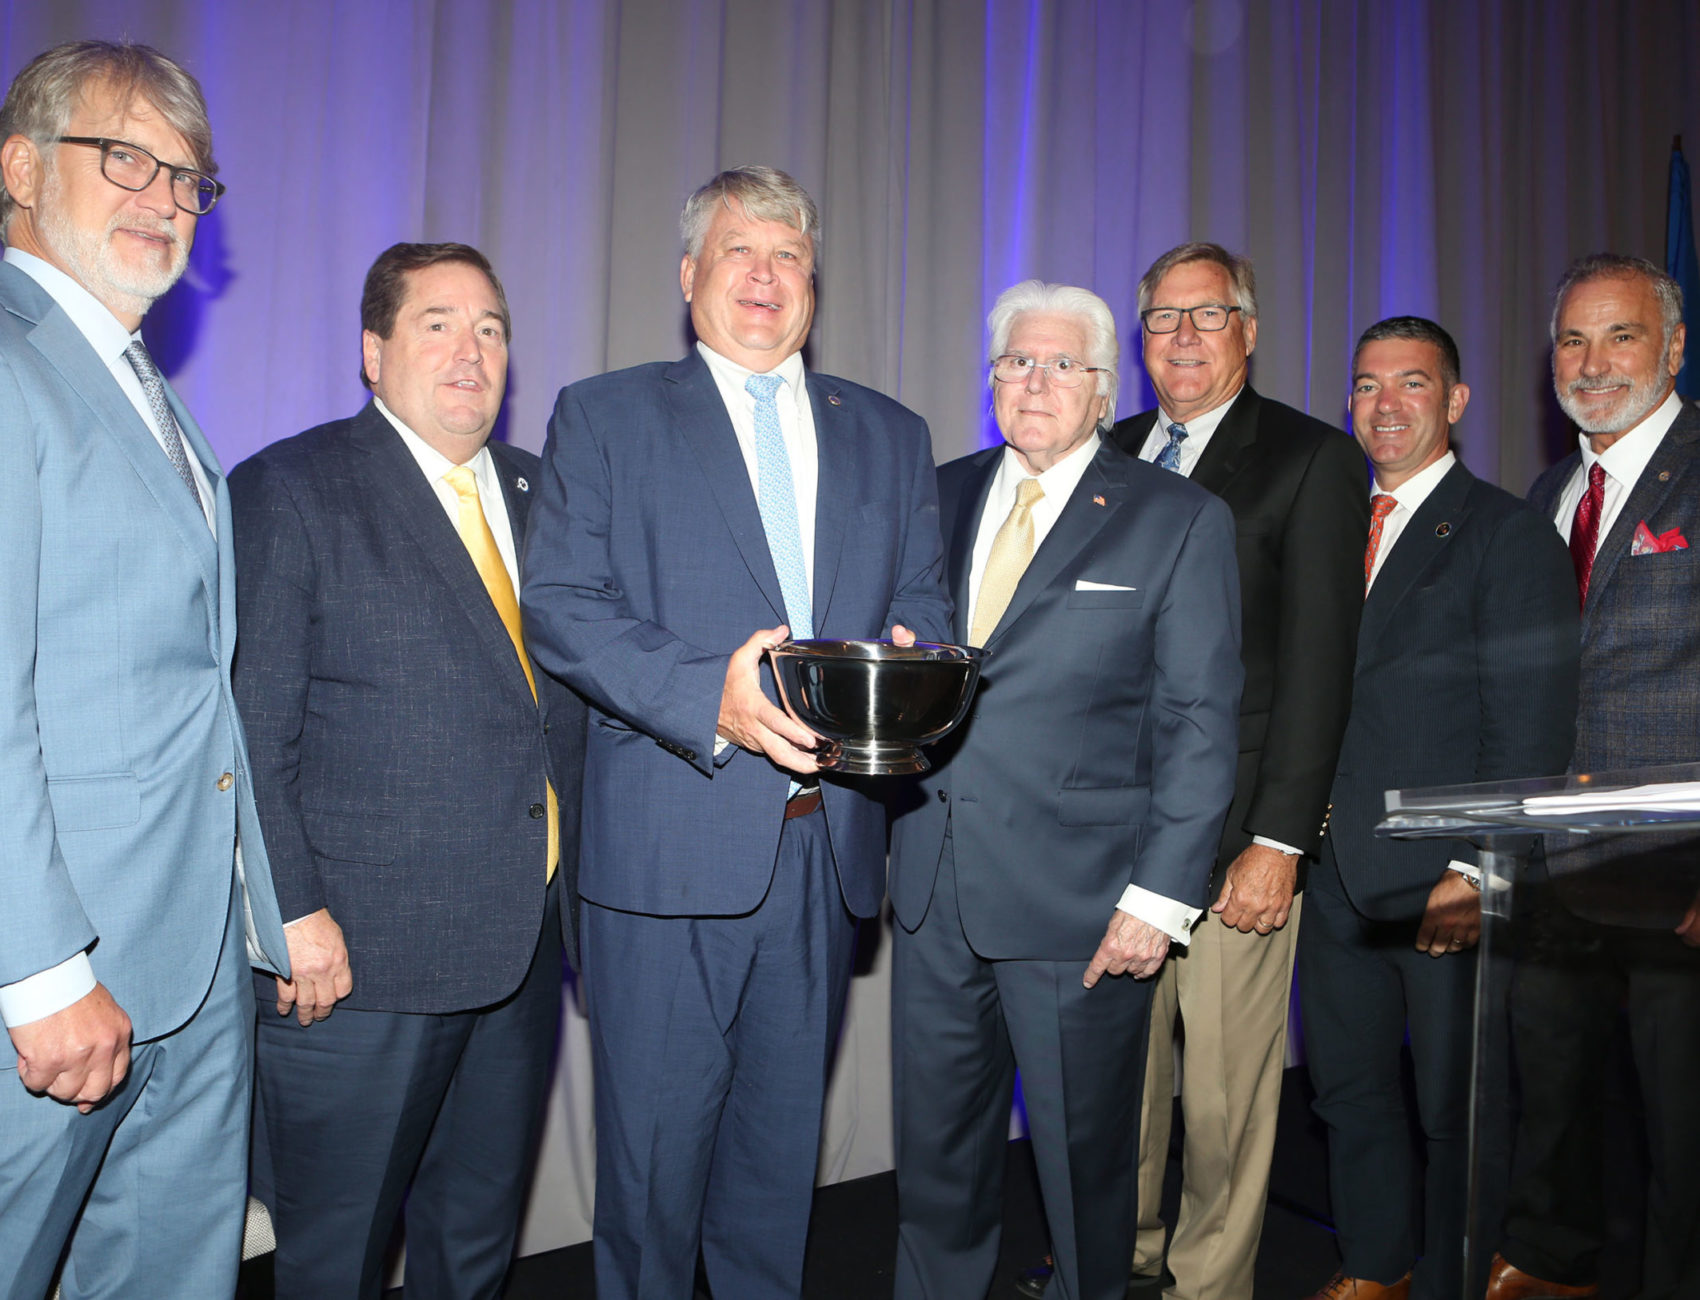 The World Trade Center of New Orleans honored Sean Duffy Sr. as the recipient of the C. Alvin Bertel Awards during a ceremony in the Plimsoll Ballroom at the Four Seasons Hotel in New Orleans, Louisiana on Friday, June 24, 2022.  (Photo by Peter G. Forest/Forest Photography, LLC)